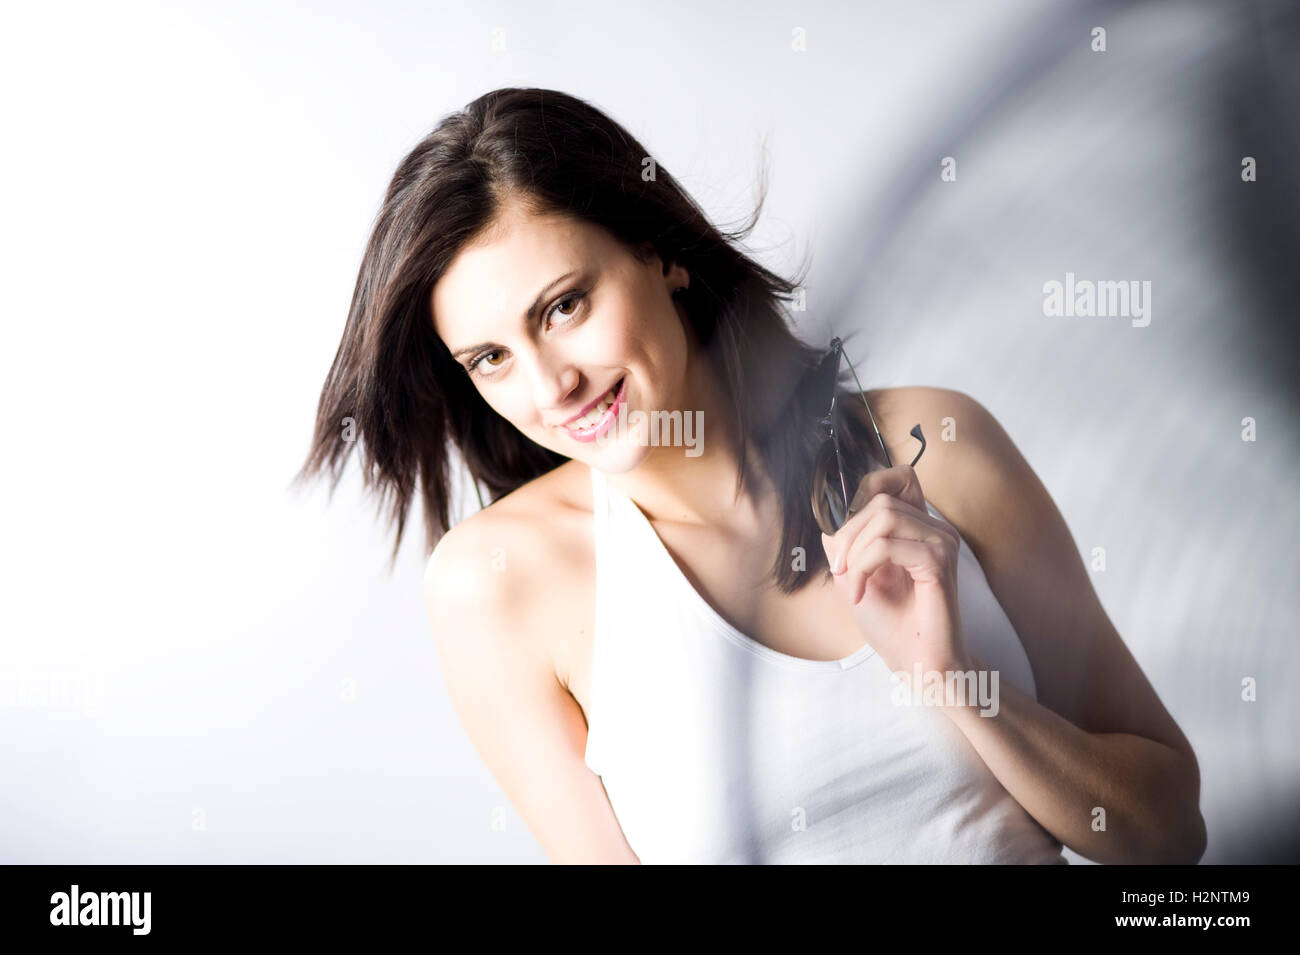 Dark-haired young woman Banque D'Images